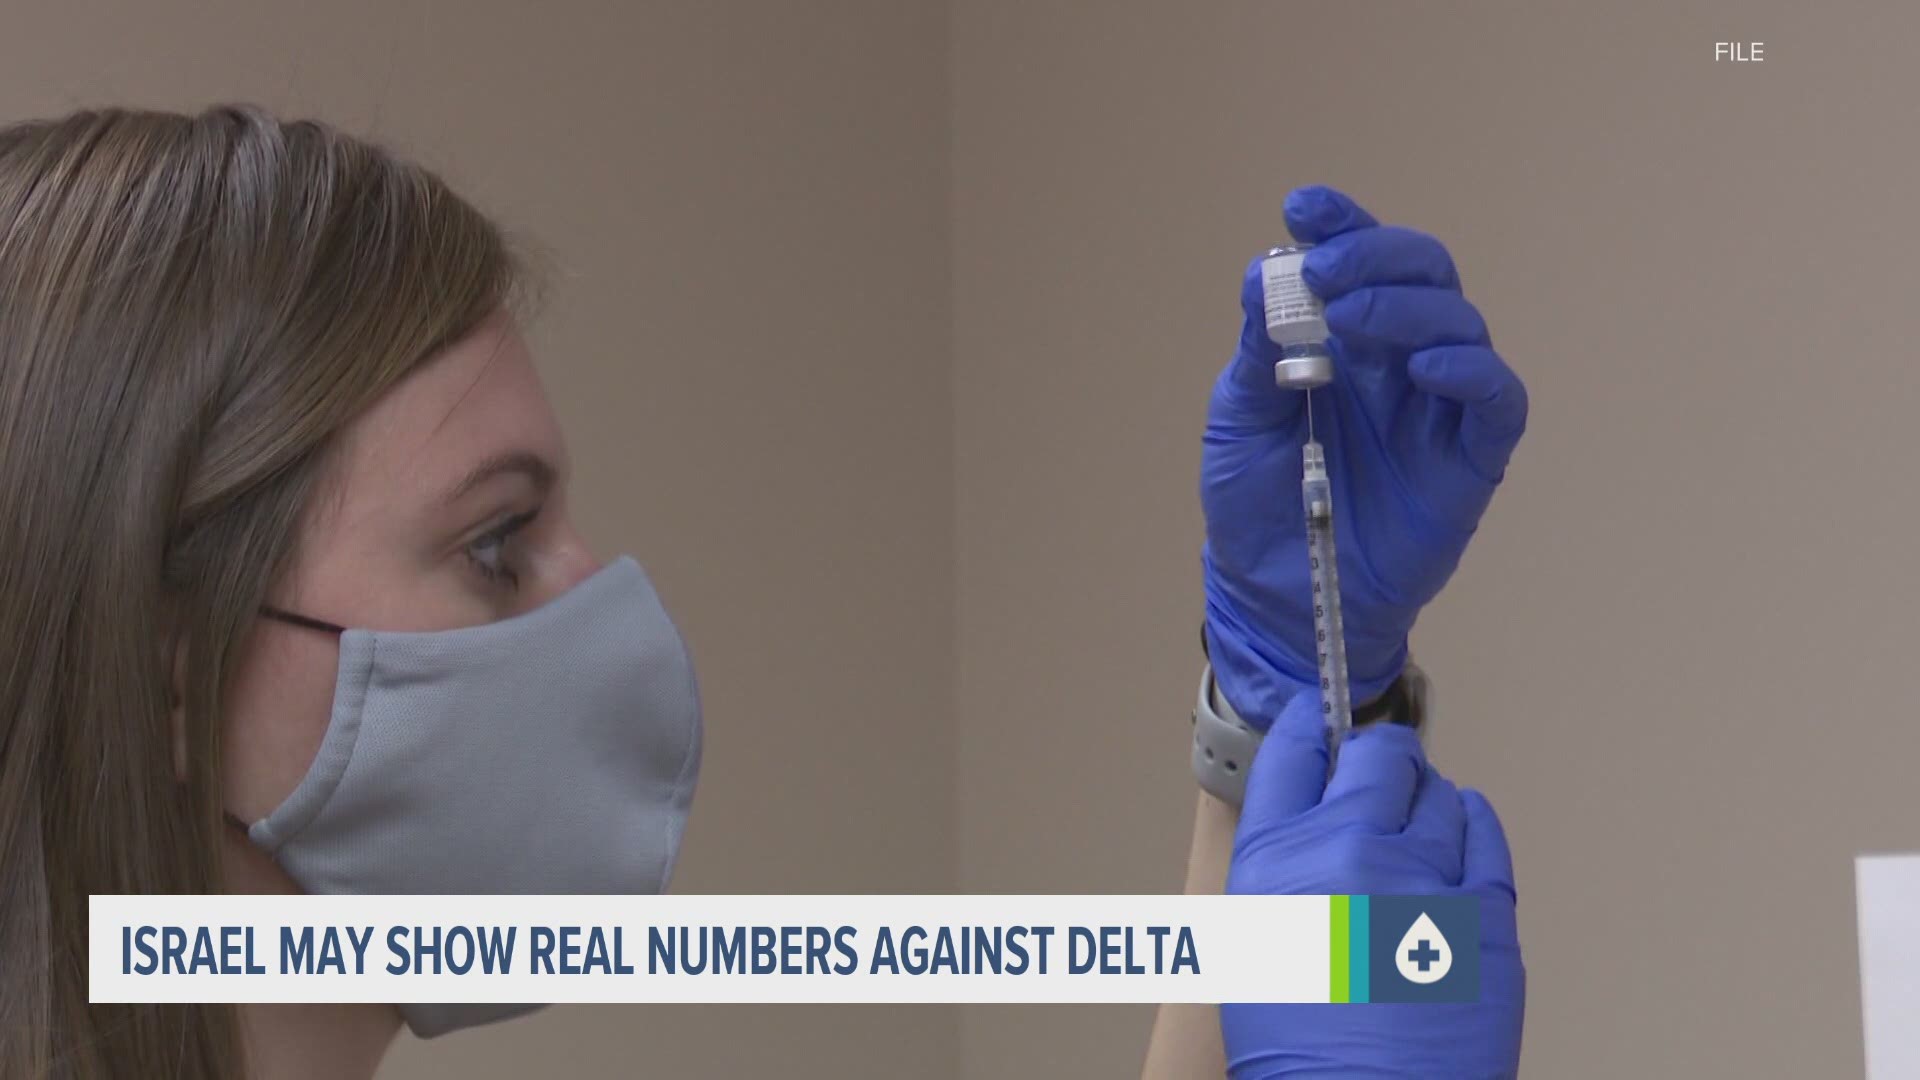 With the advent of the vaccine, deaths per day have plummeted from 18,000 to 7,900. But the highly contagious delta variant is setting off new alarms.